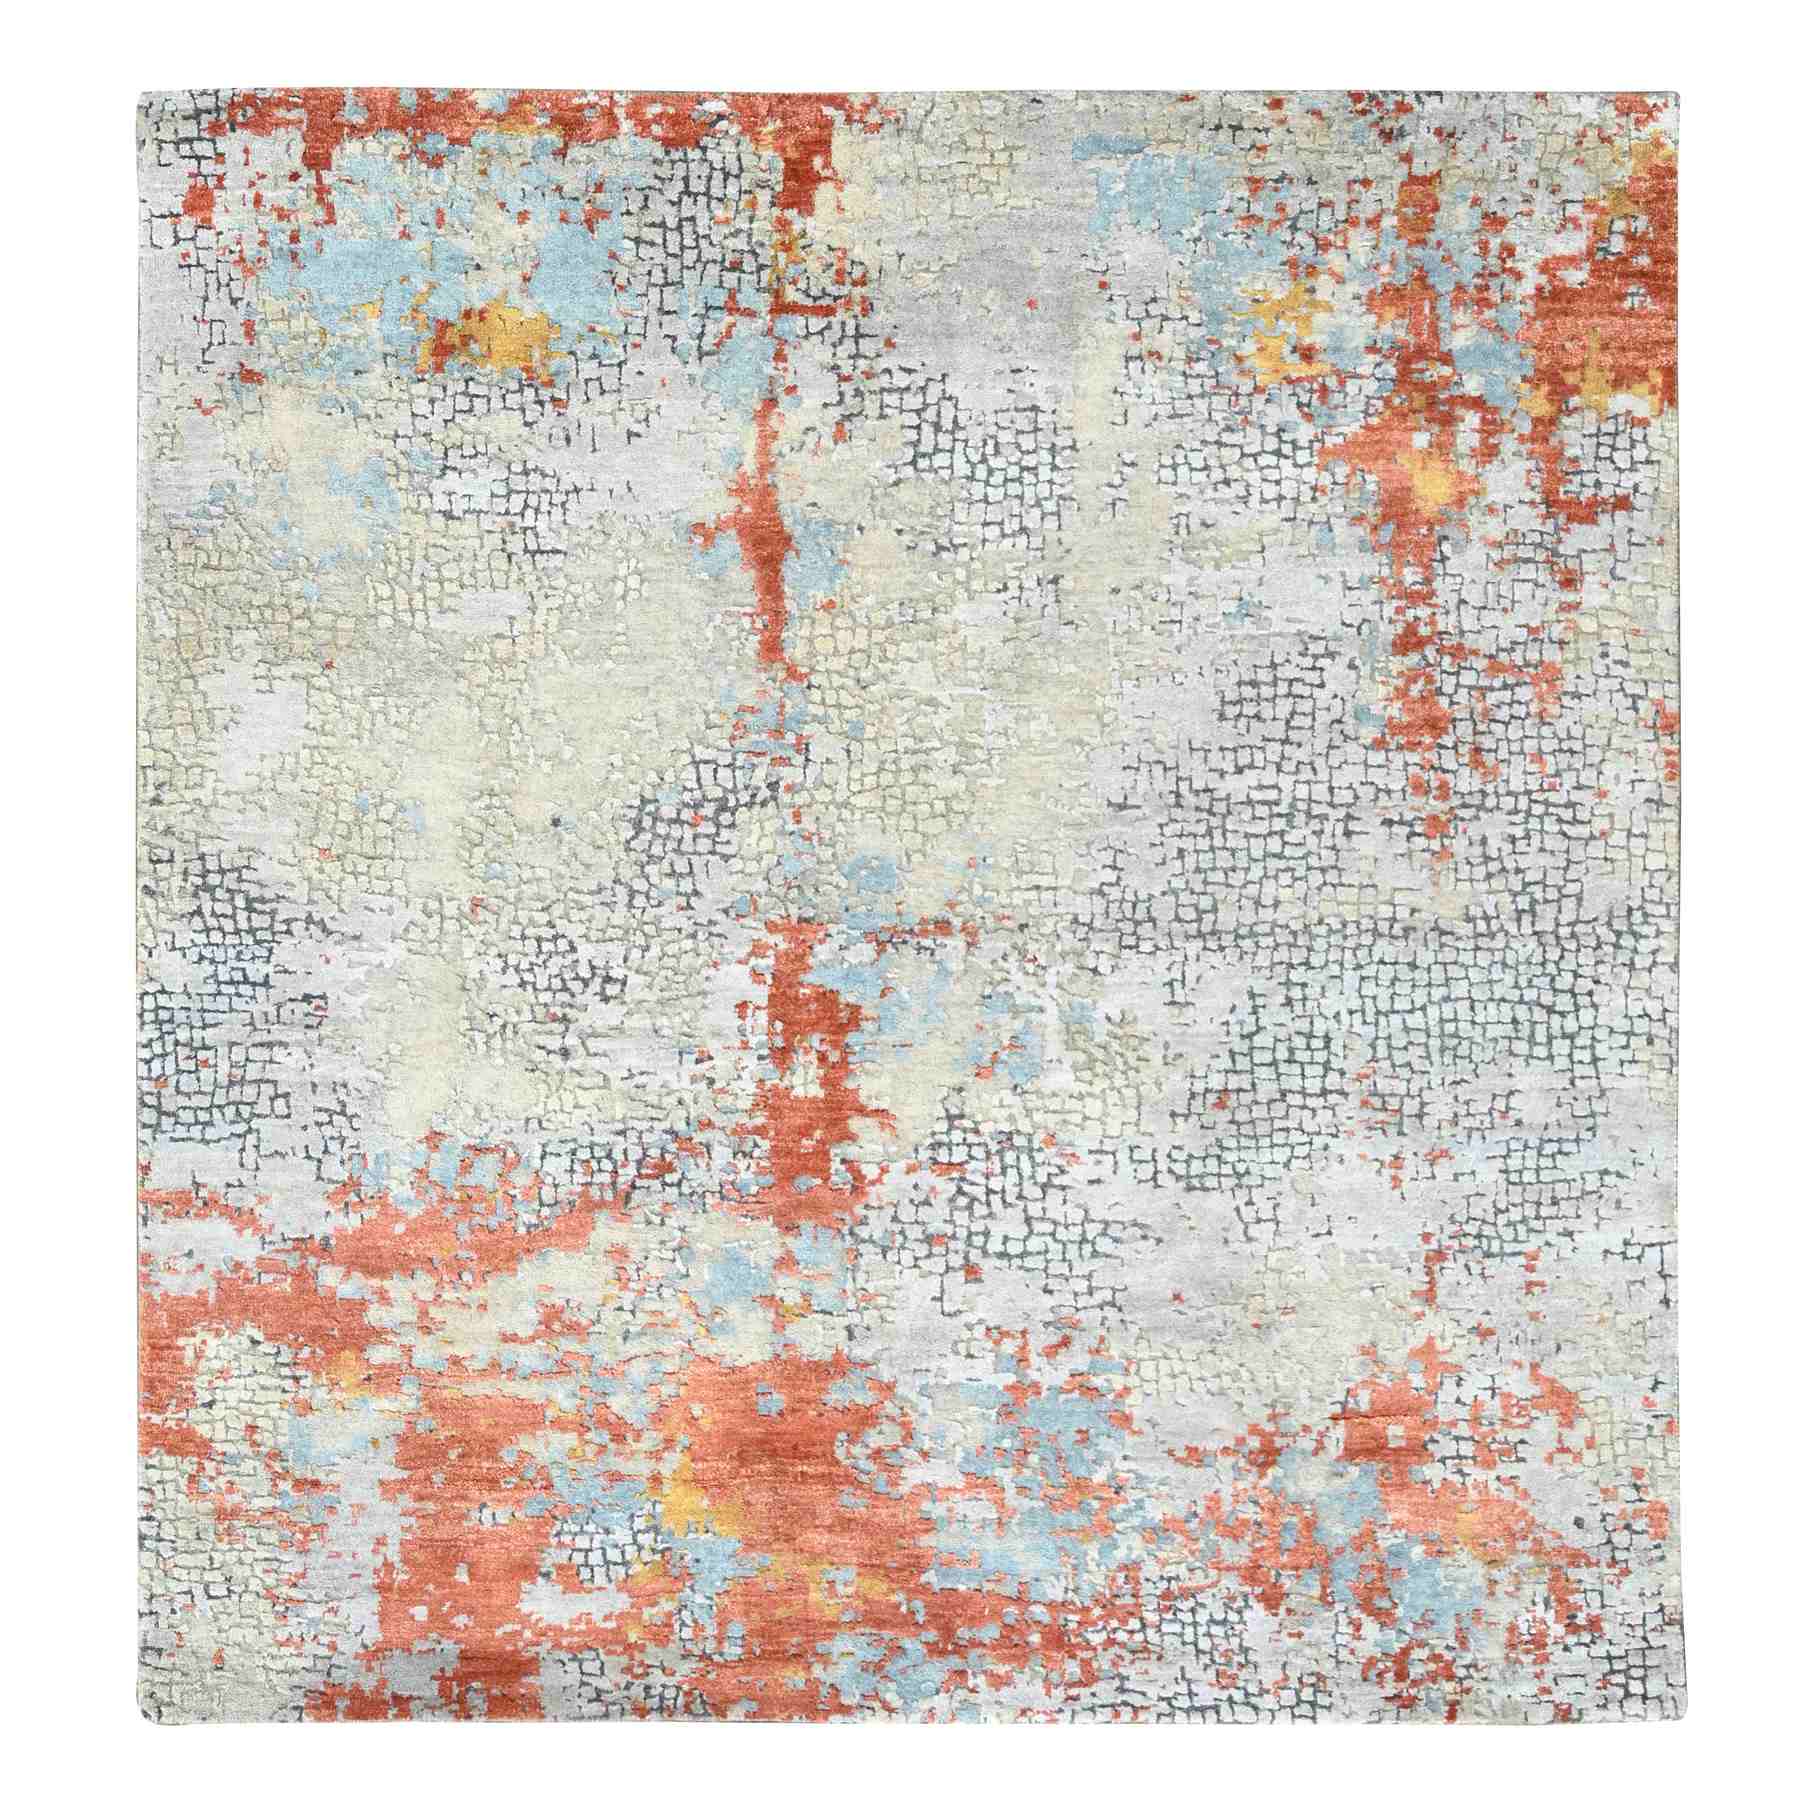 Modern-and-Contemporary-Hand-Knotted-Rug-423410